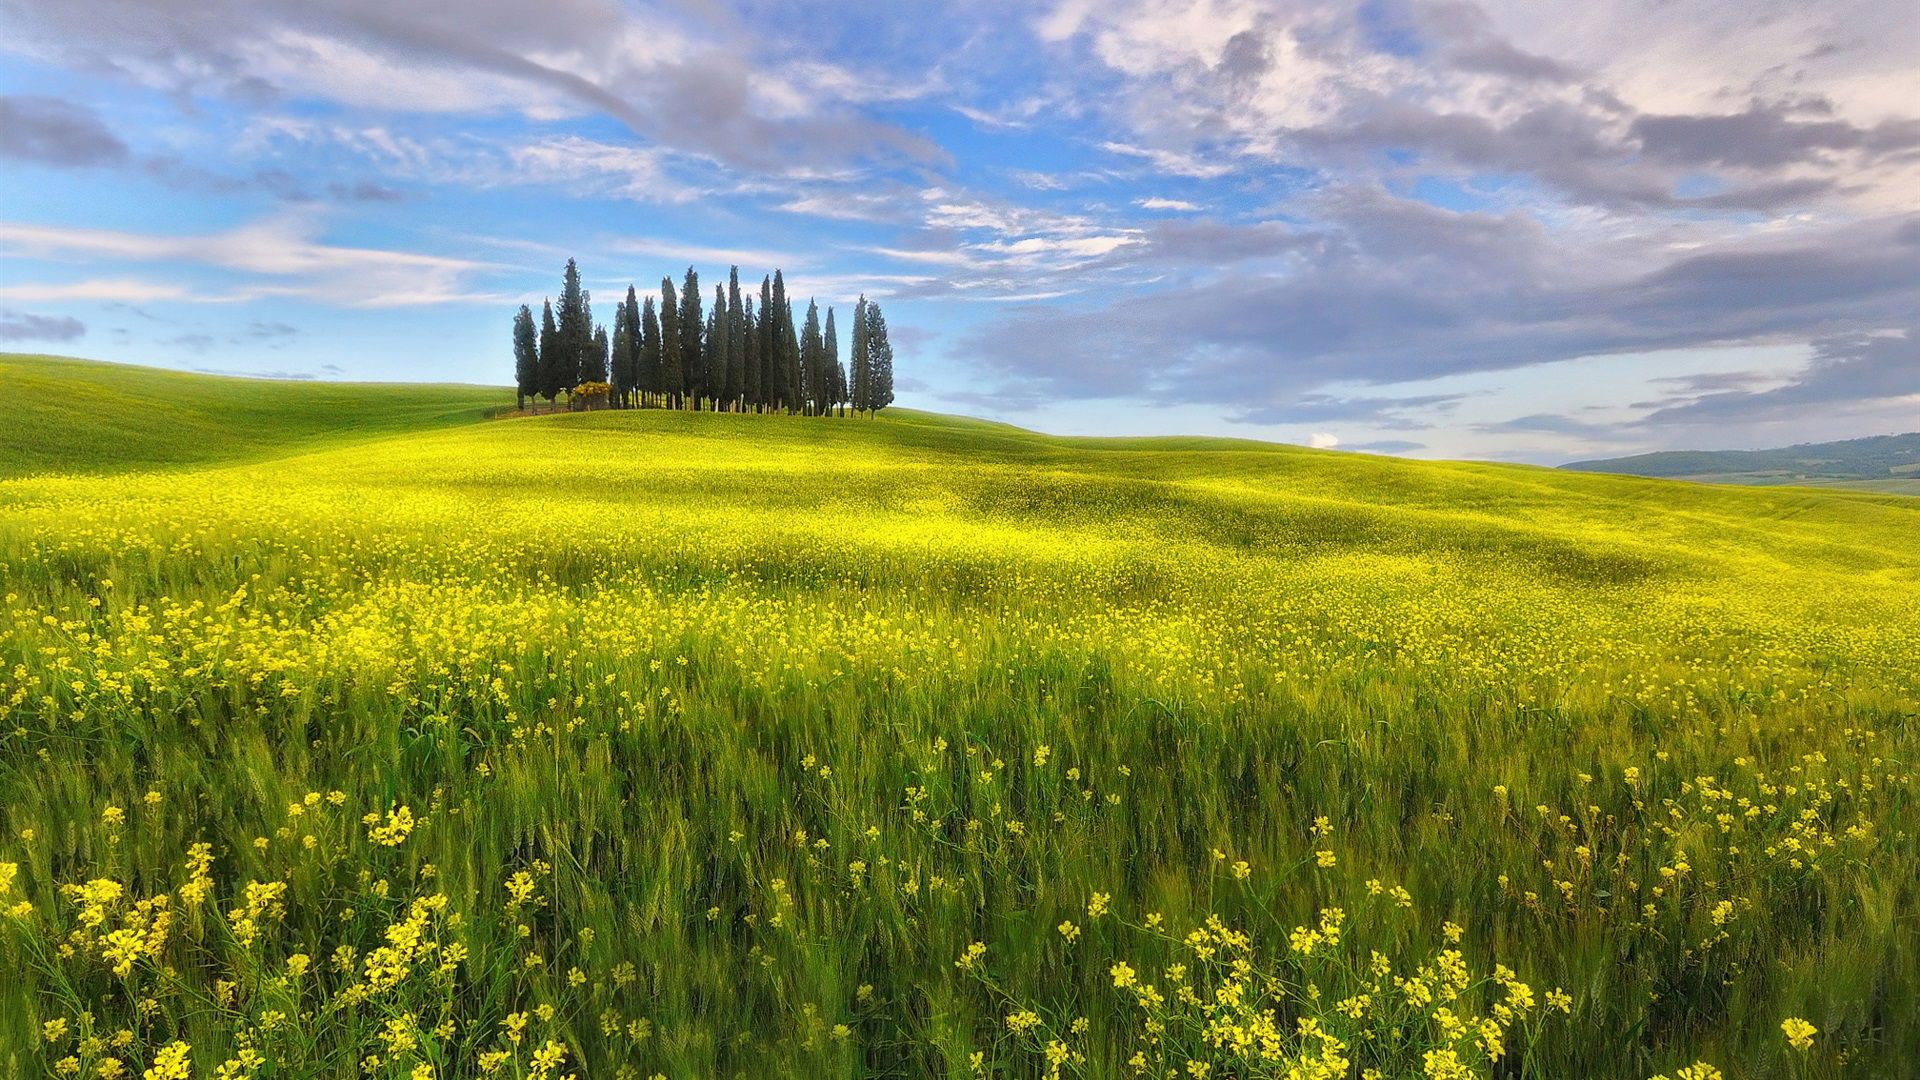 Italy, Tuscany, spring, fields, rapeseed flowers, sky, clouds